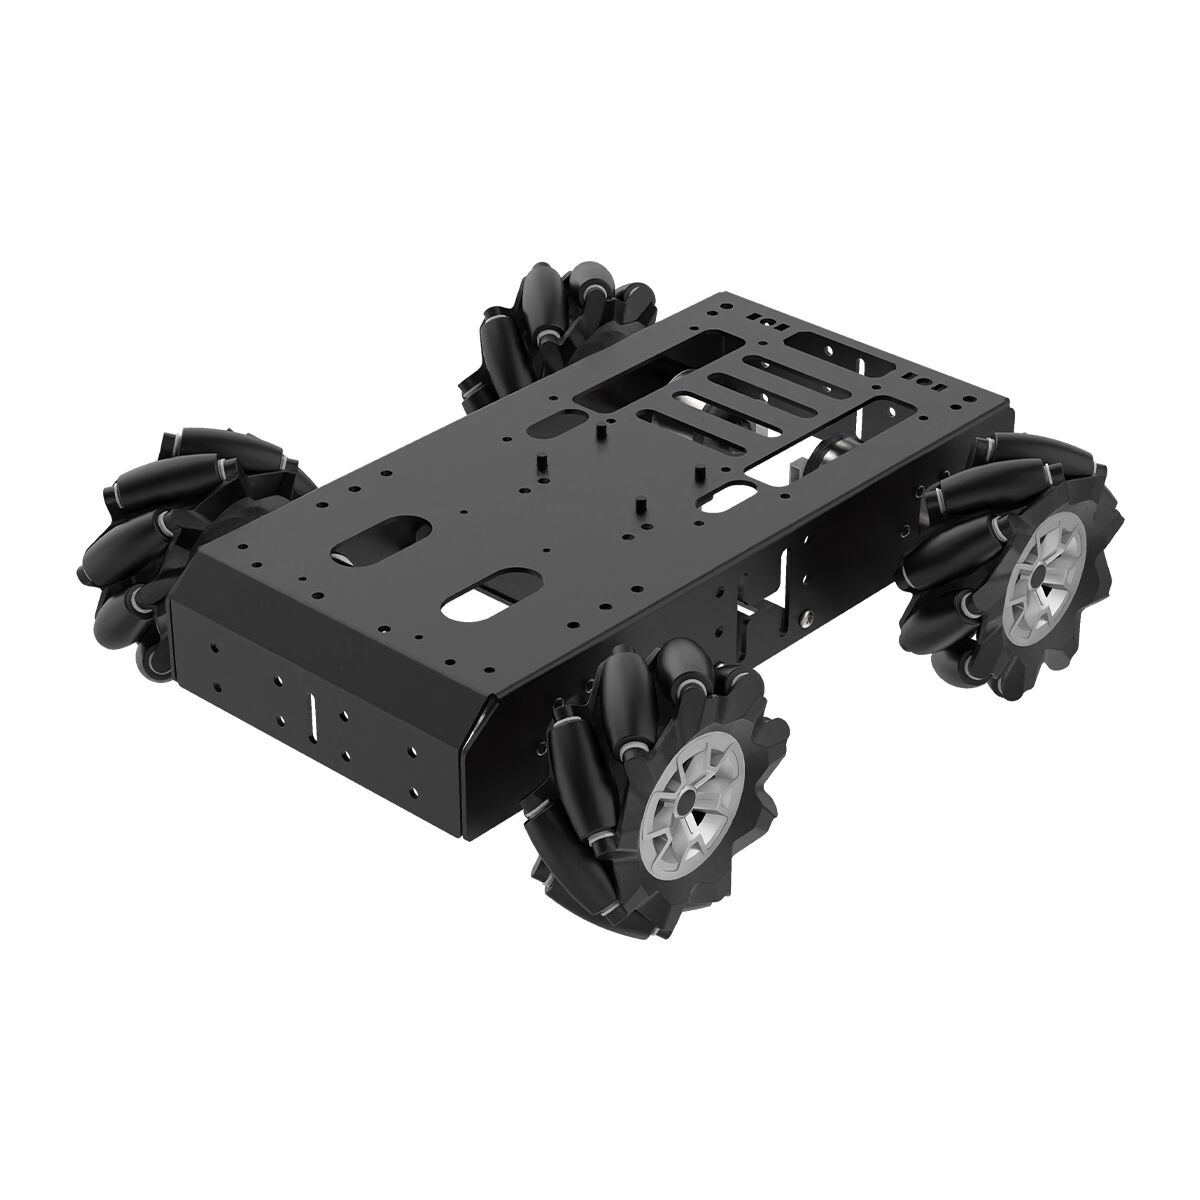 Hiwonder Large Metal 4WD Vehicle Chassis for Arduino/Raspberry Pi/ROS